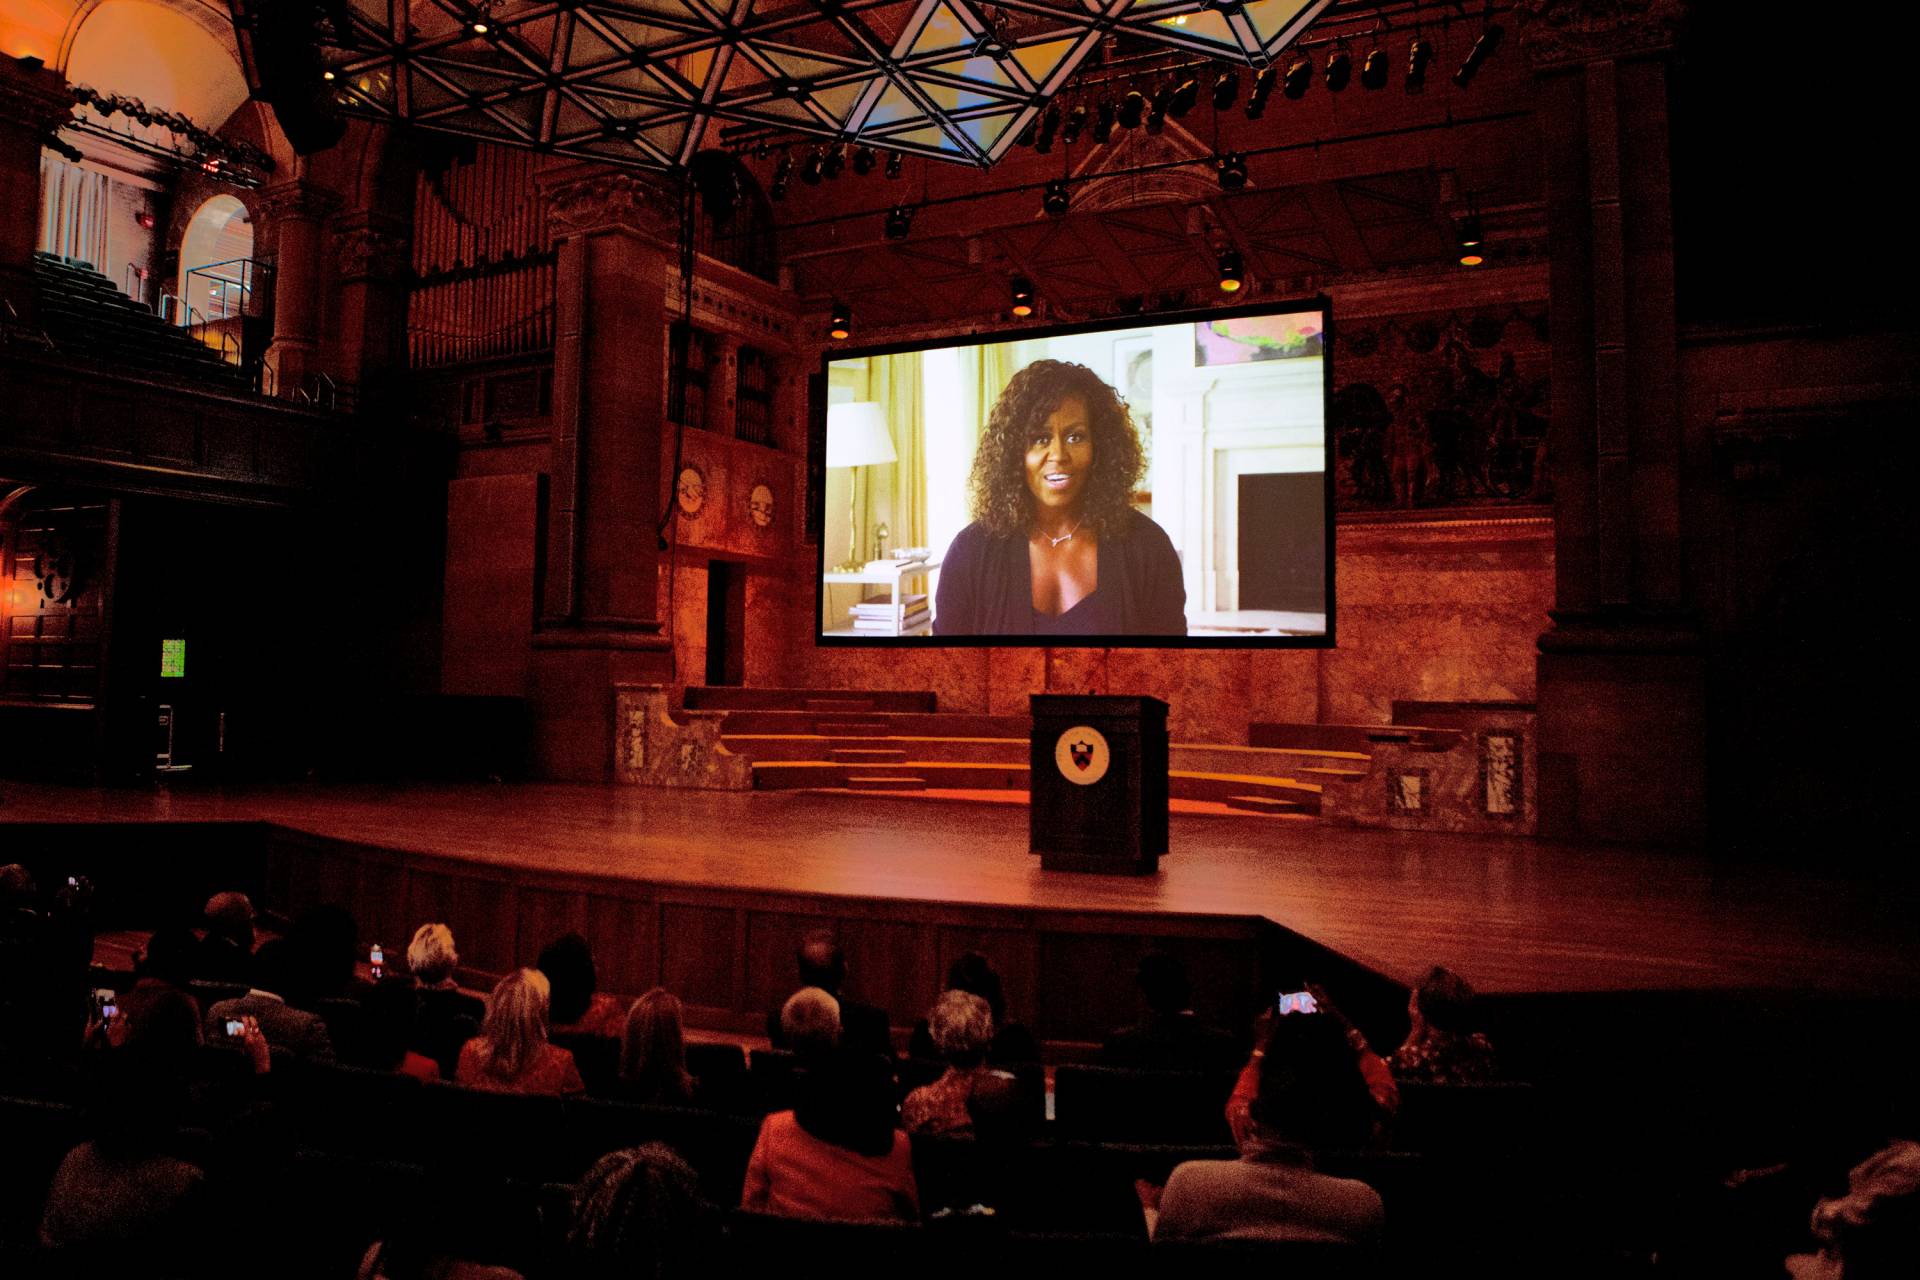 Michelle Obama's video address projected on stage